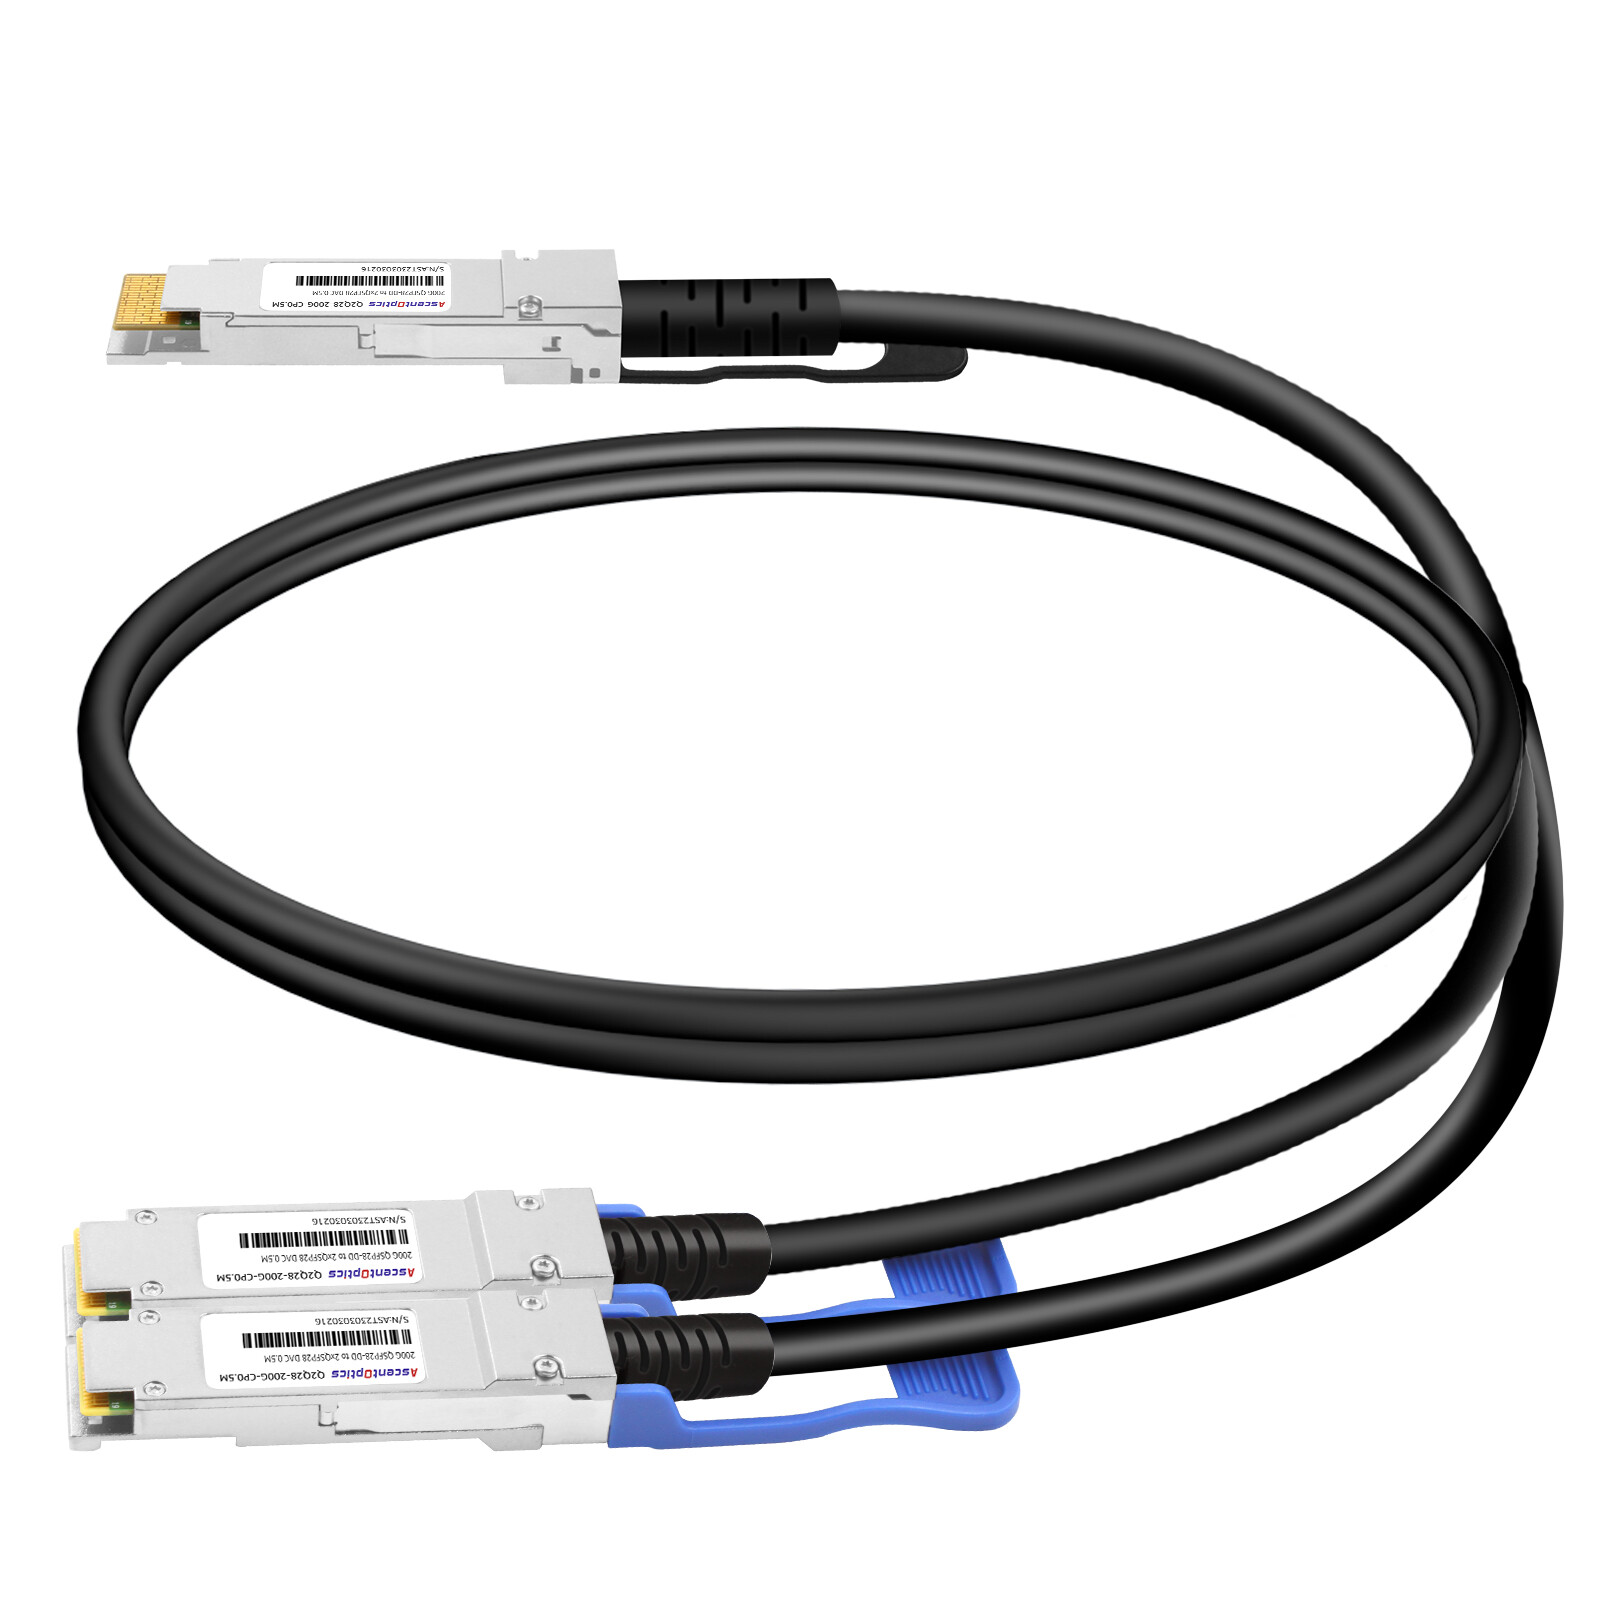 200G QSFP28-DD to 2x 100G QSFP28 Copper Breakout Cable,0.5 Meter,Passive